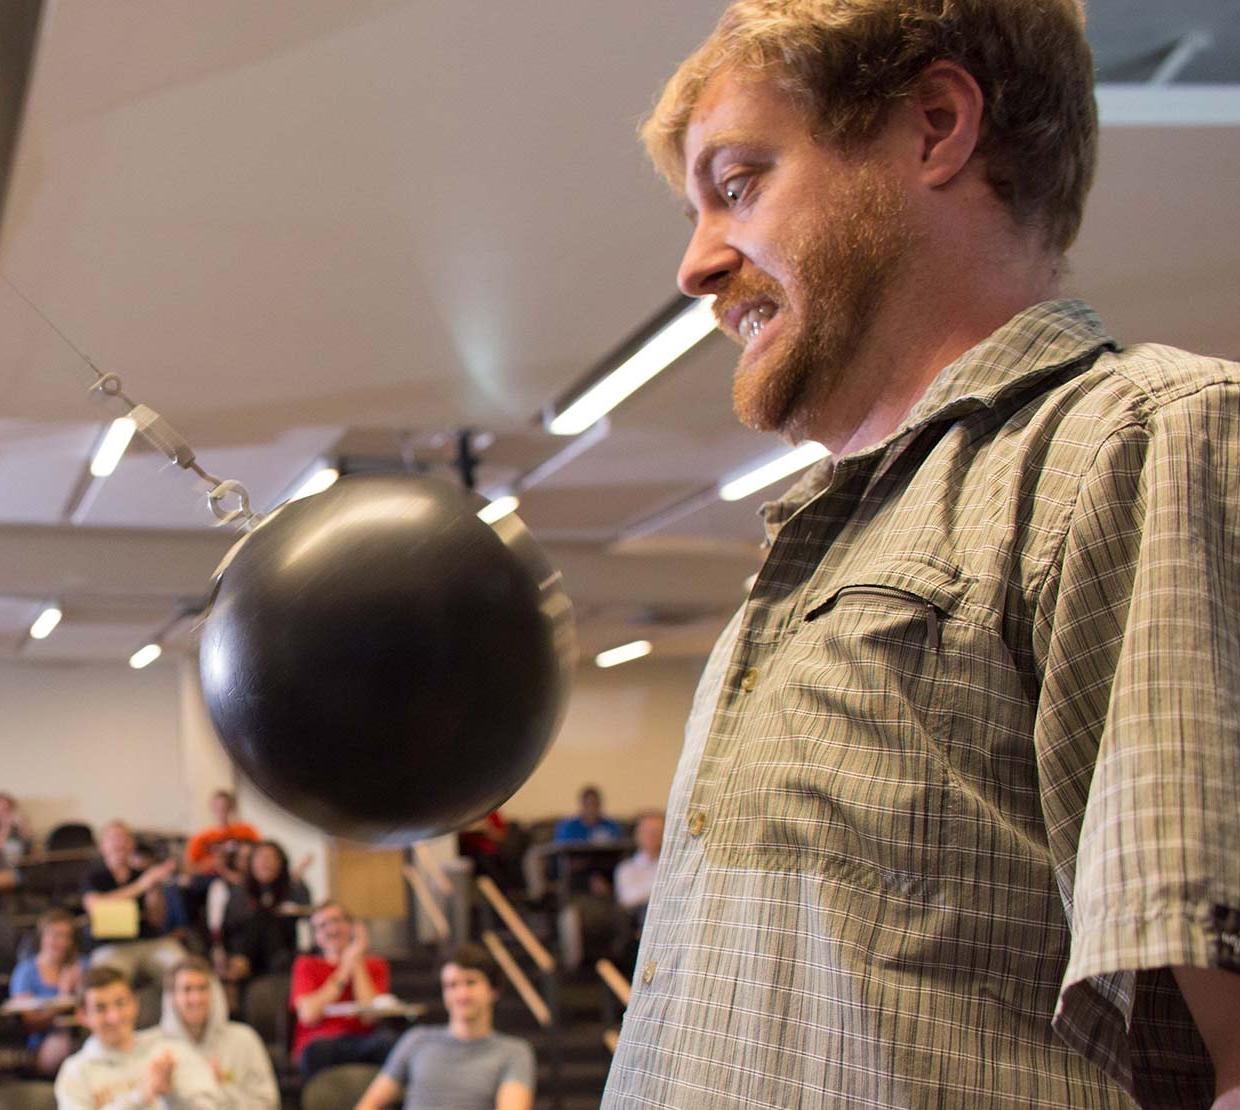 KC Walsh giving using bowling ball in lecture demo